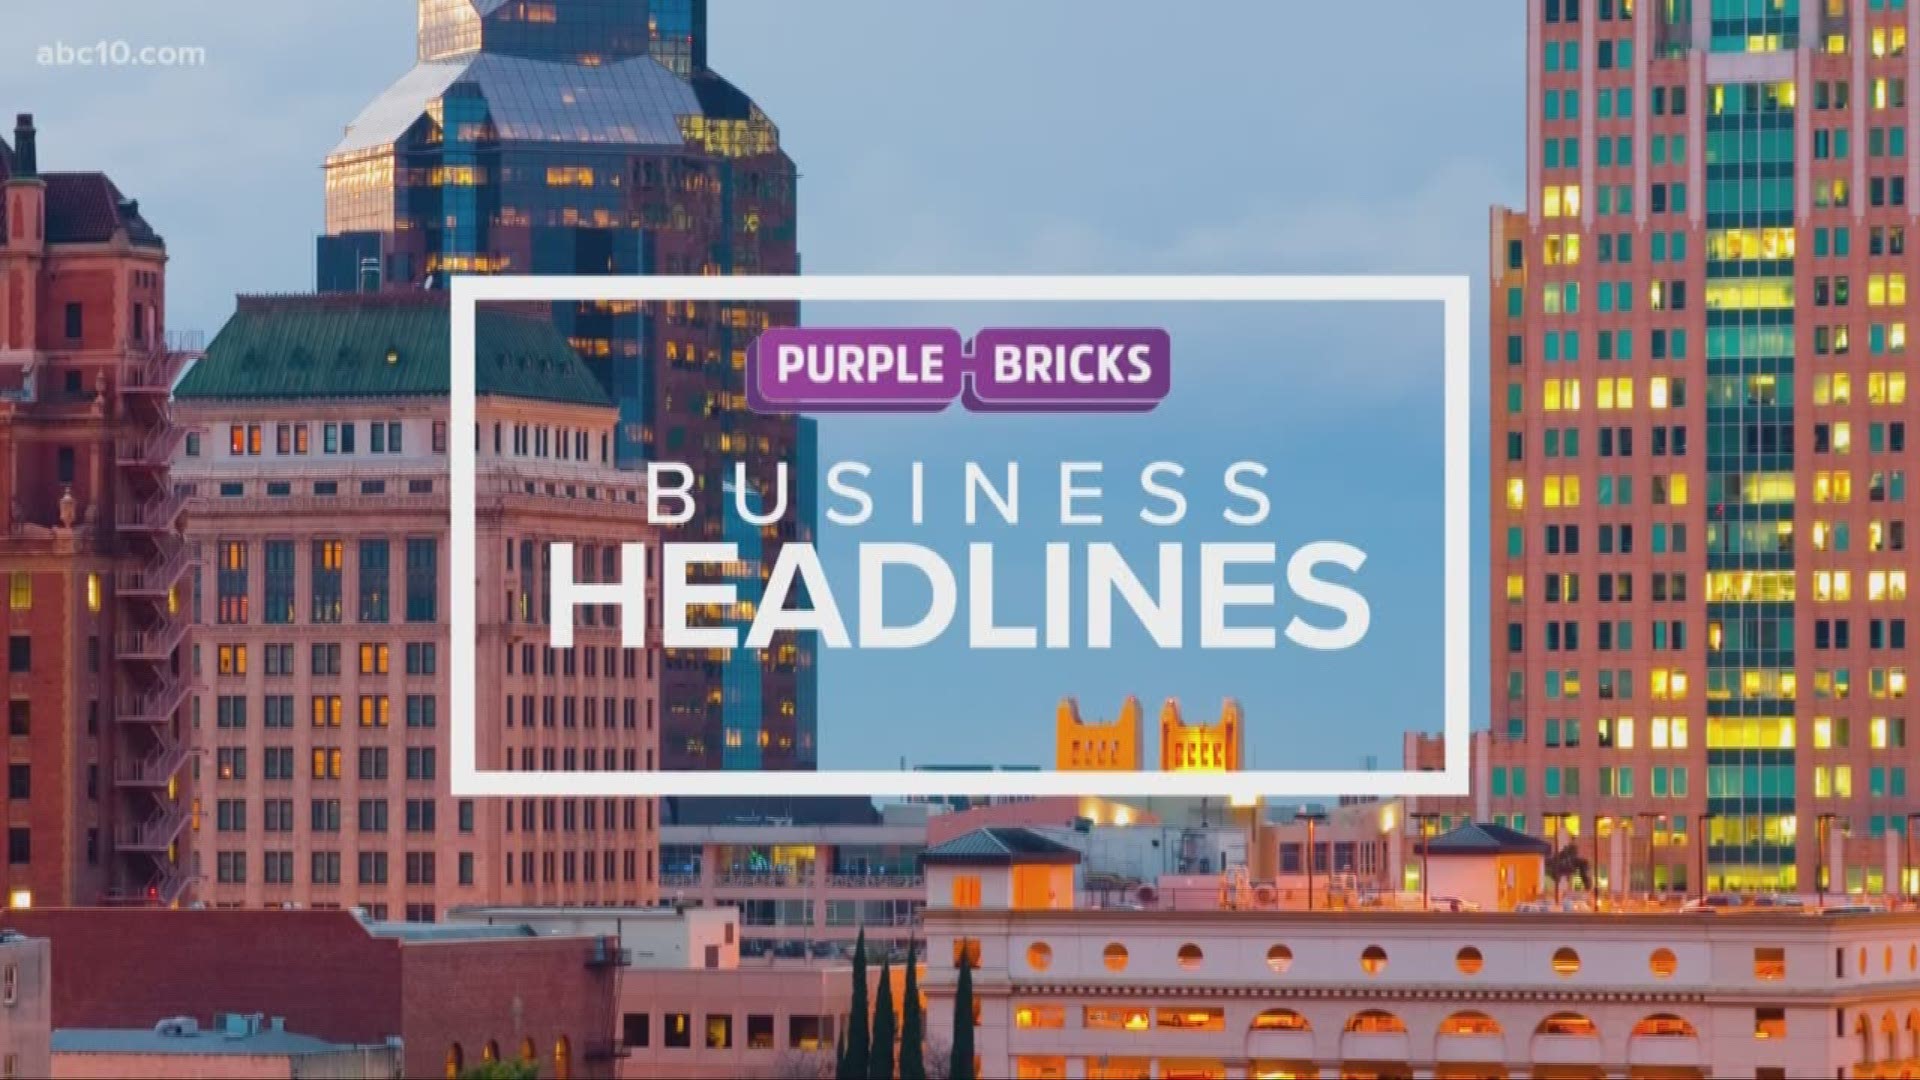 Ariane Datil has a look at your business headlines.